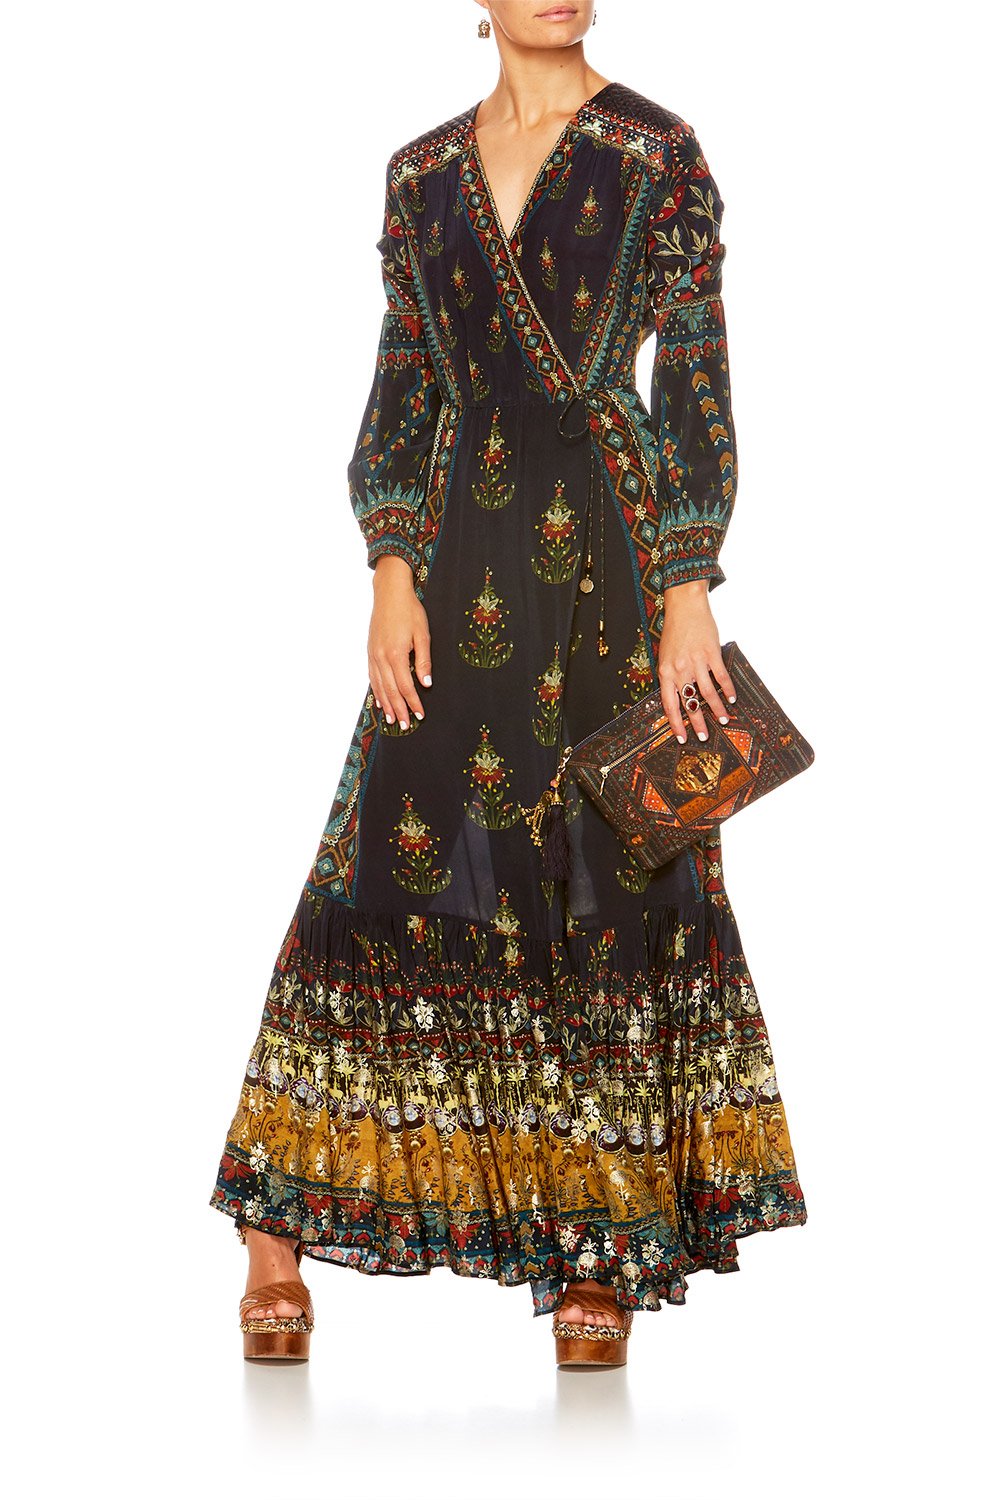 BLISS OF BOHEMIA QUILTED YOKE WRAP DRESS